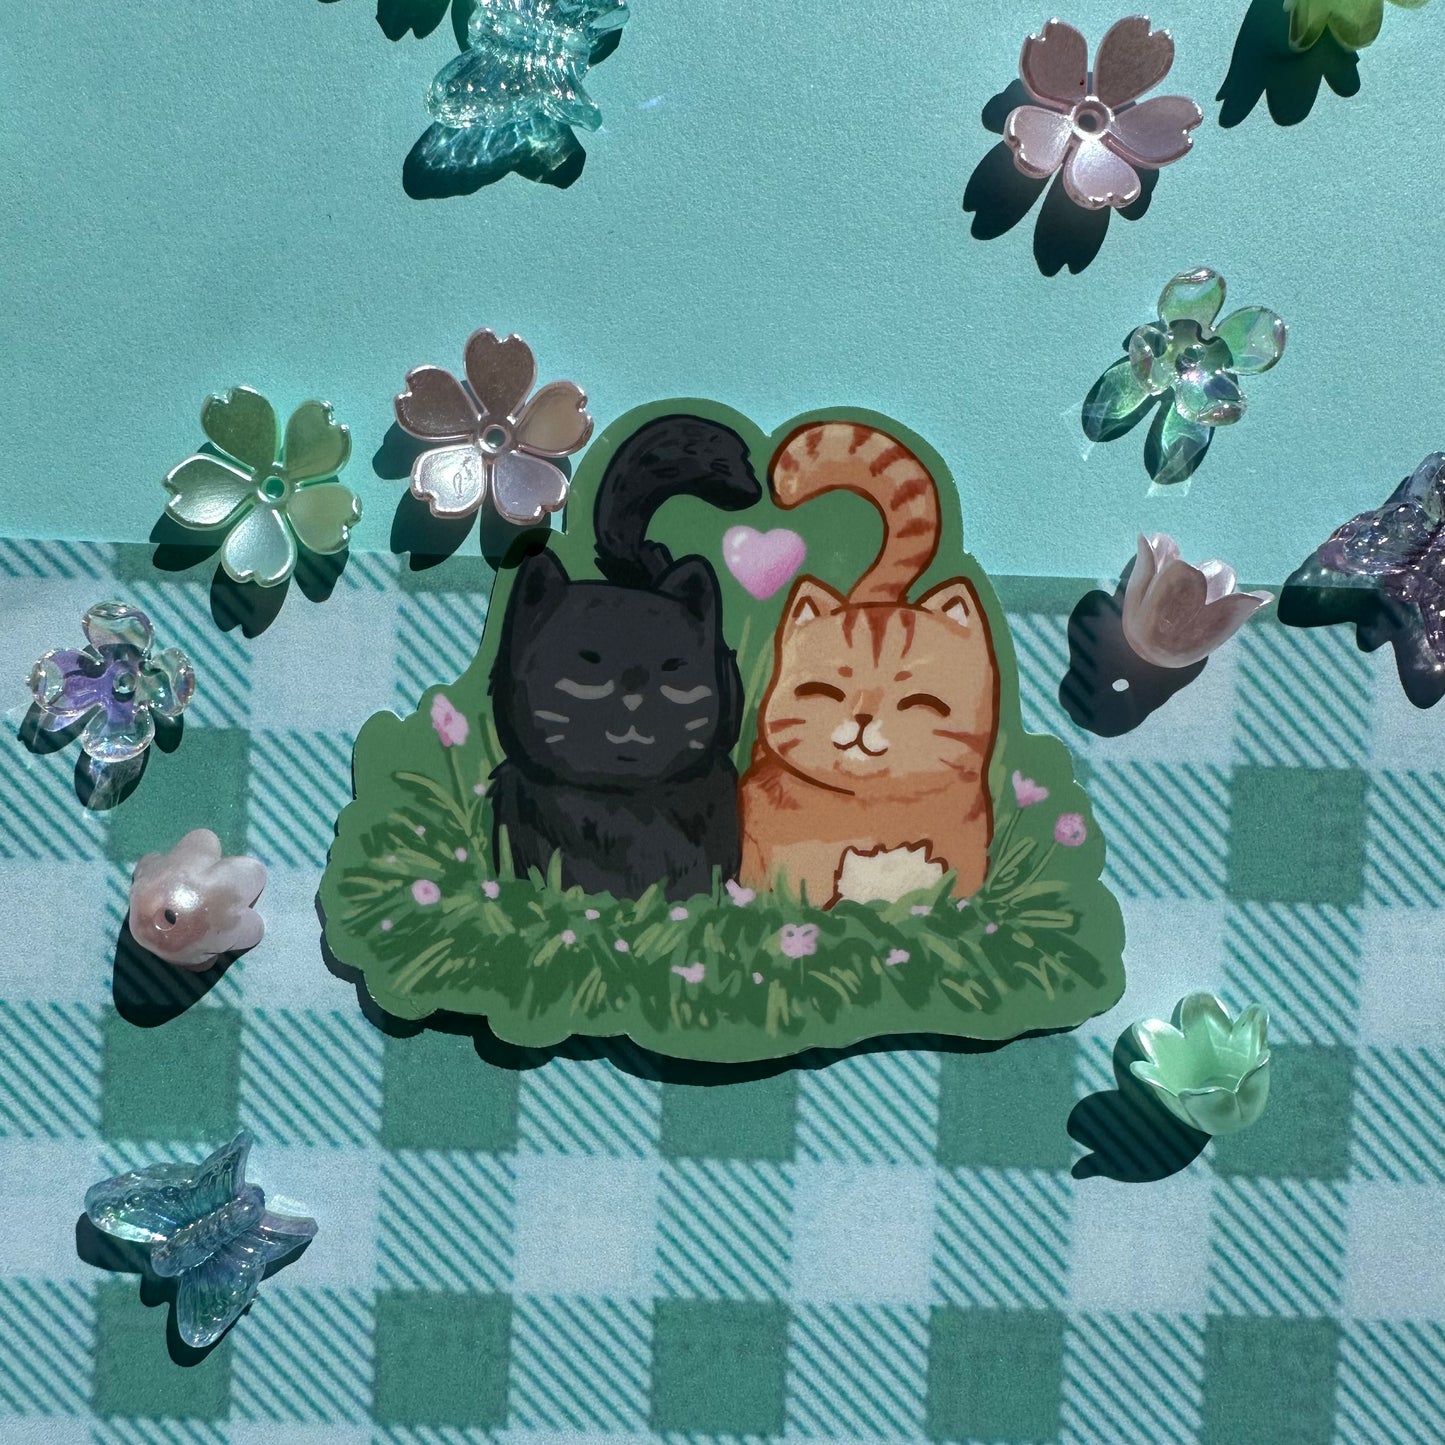 Cats in love stickers